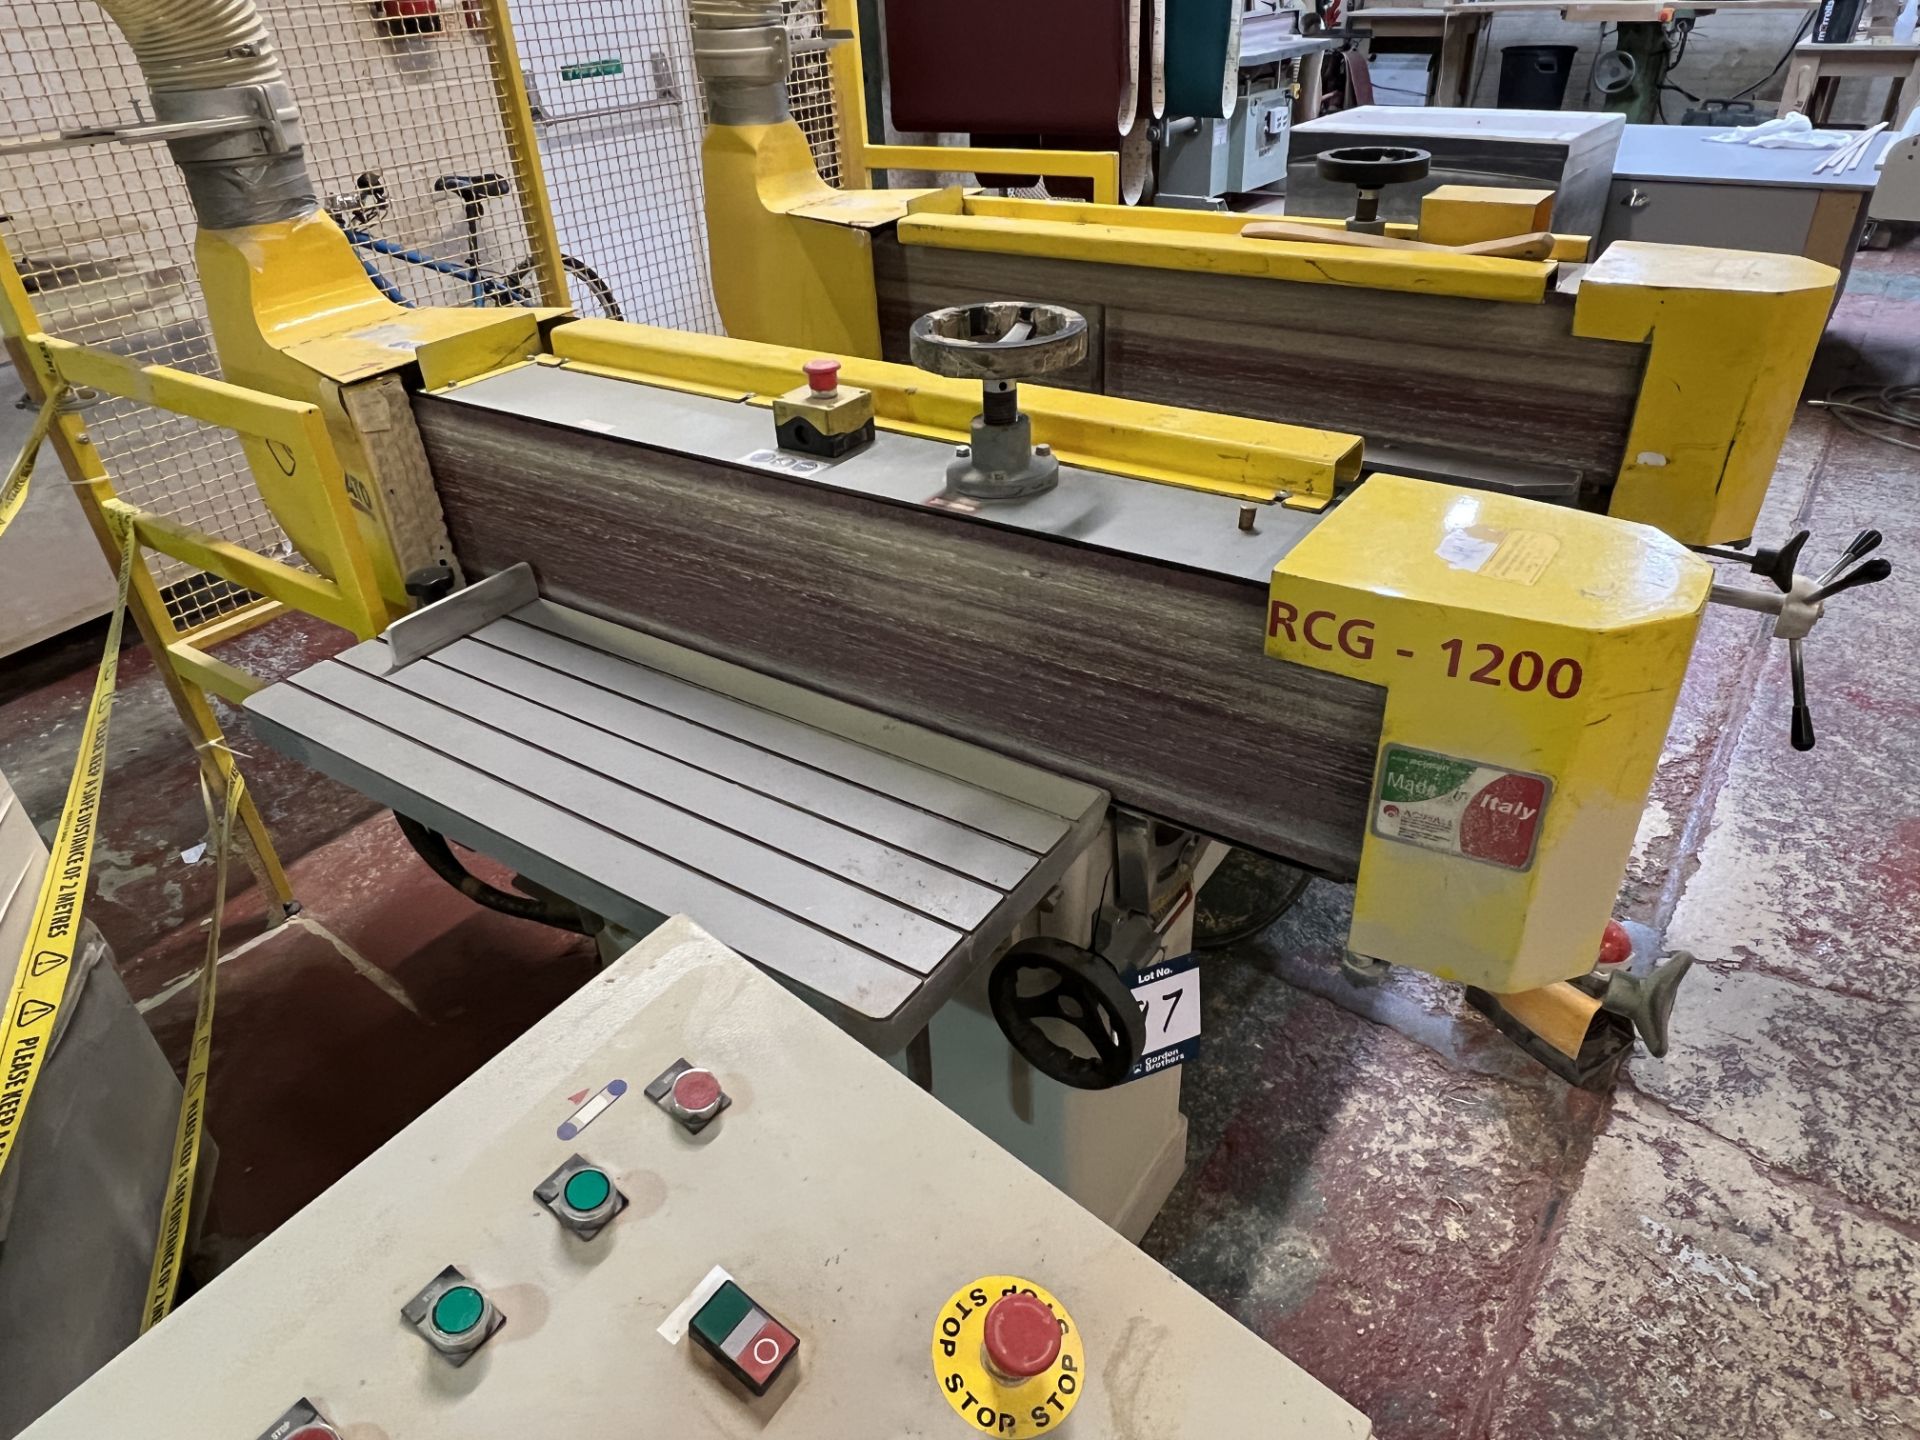 Volpato - Lasm RCG-1200 double sided wide belt box sander, belt speed 26 metres second with 920mm - Image 5 of 9